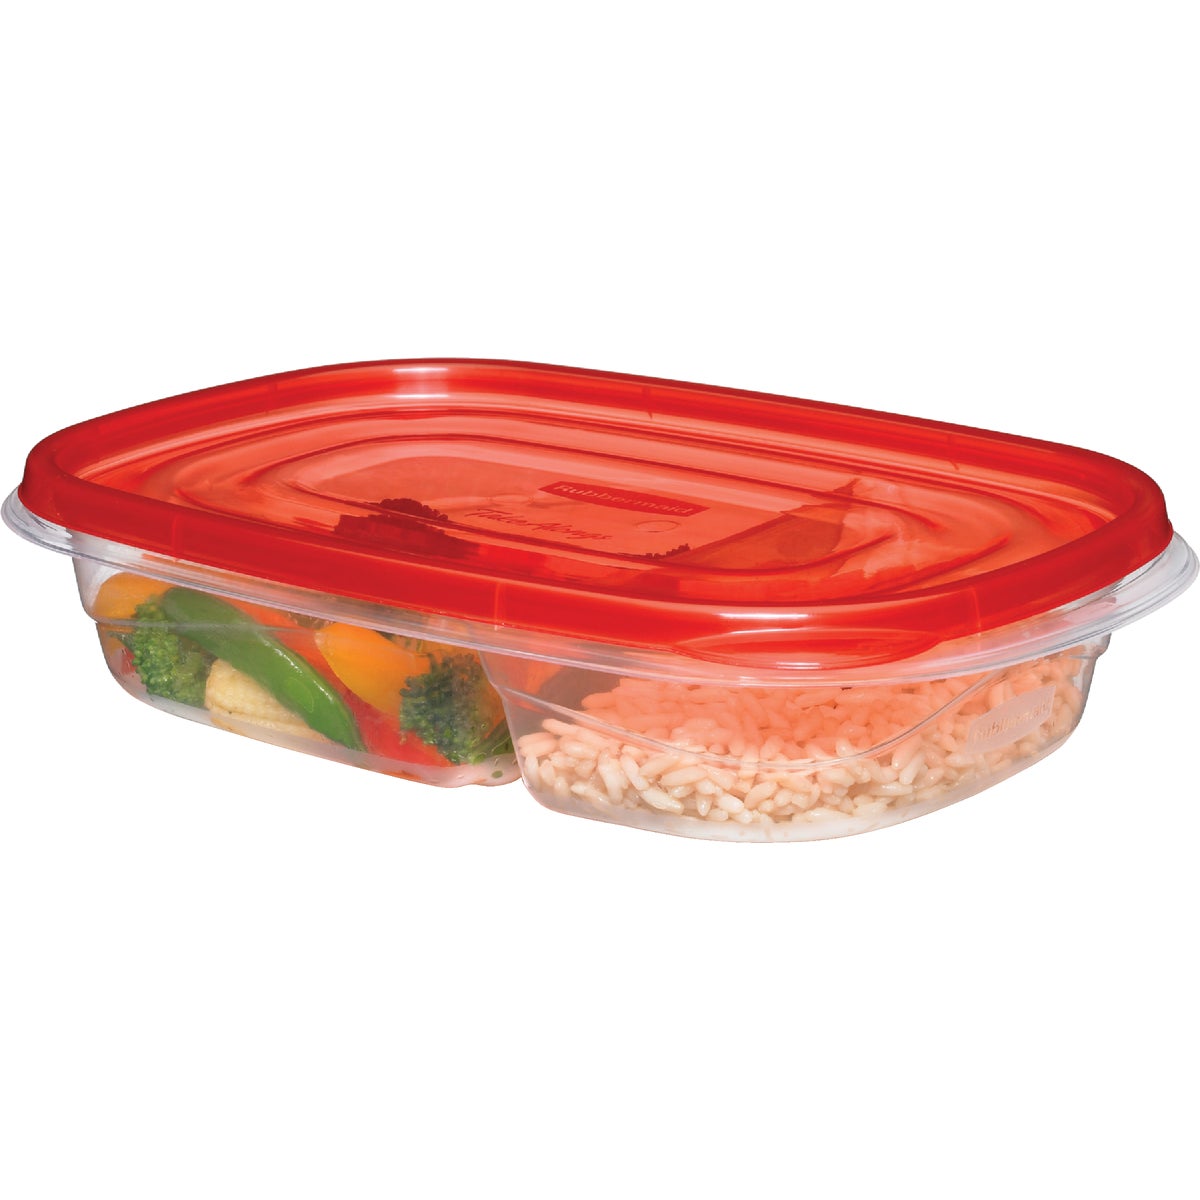 Item 624890, Soft lid grips container tightly for a great seal, yet is easy-to-open, 